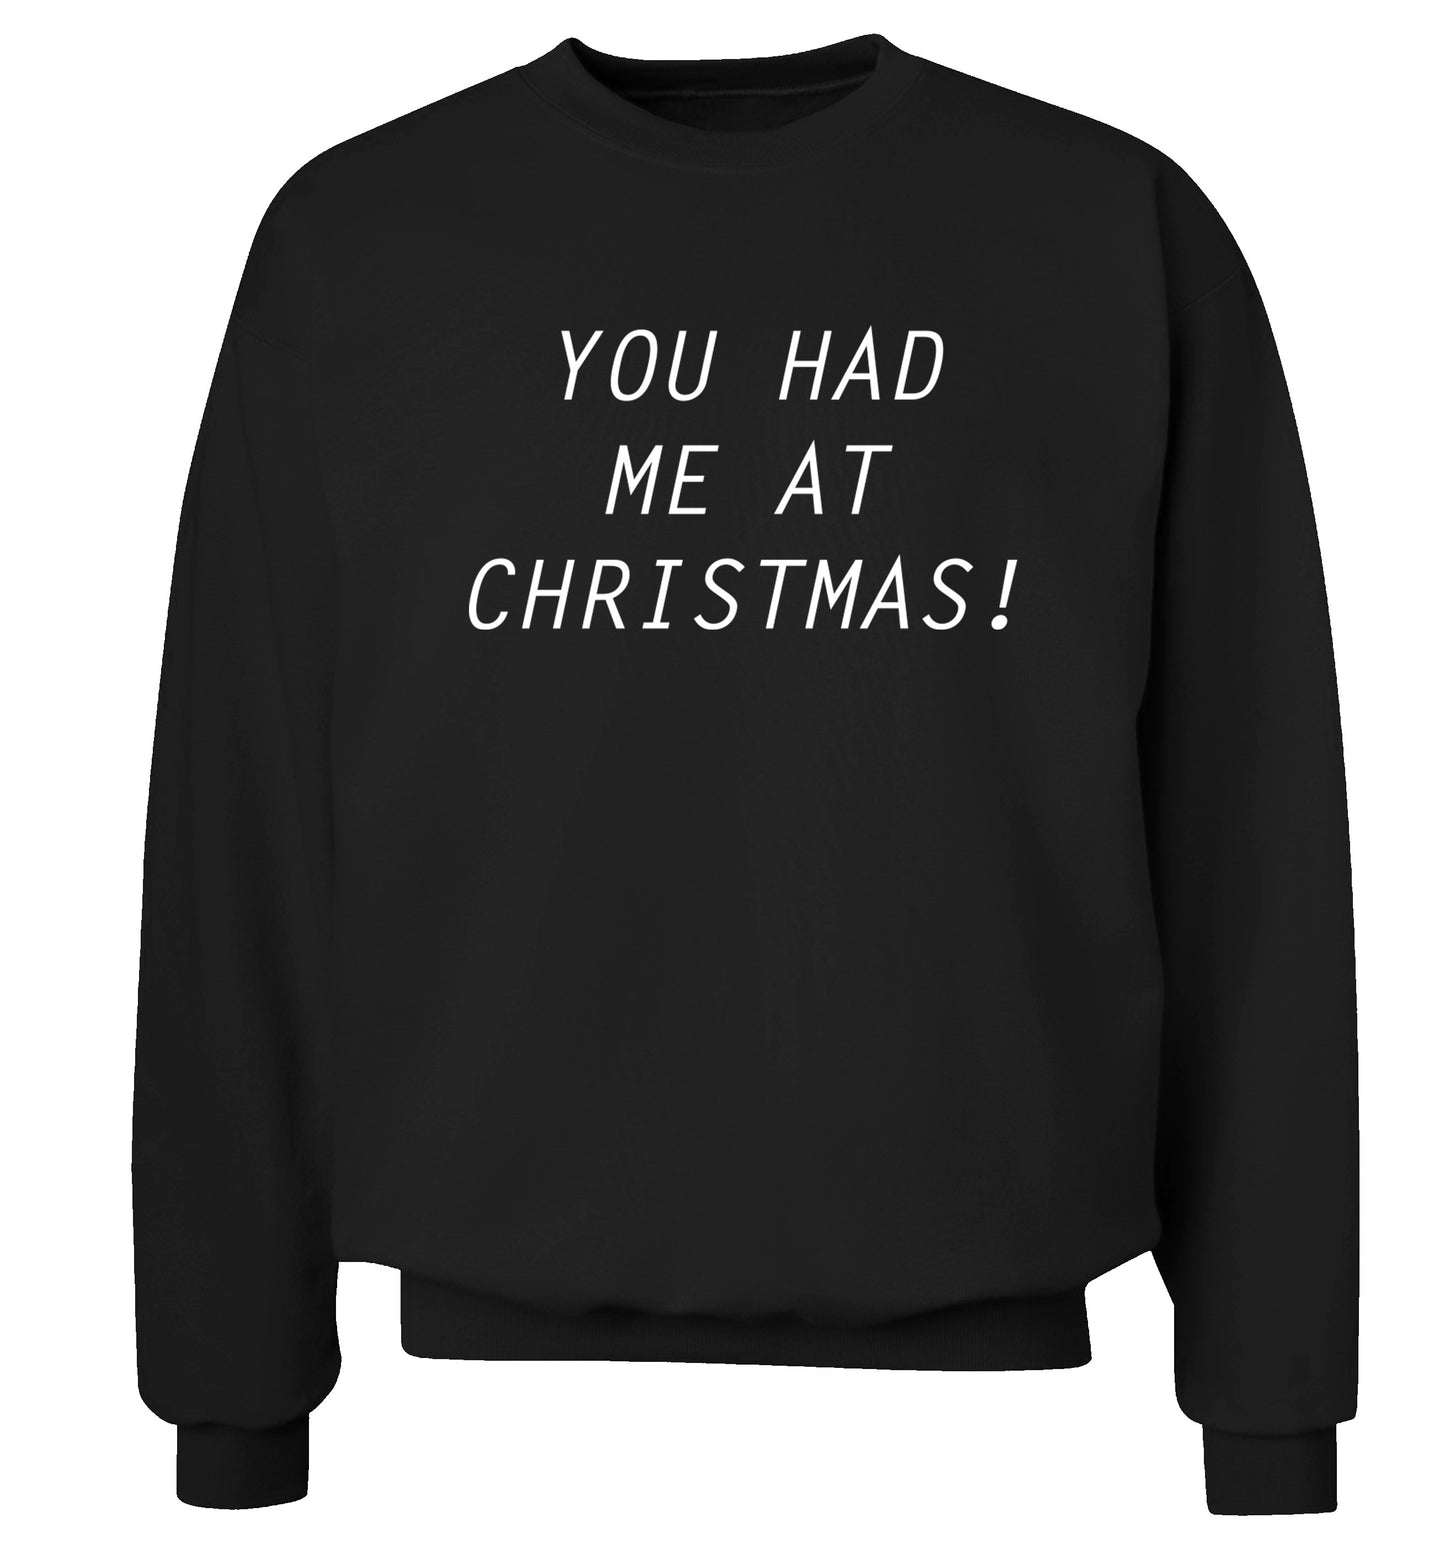 You had me at Christmas Adult's unisex black Sweater 2XL